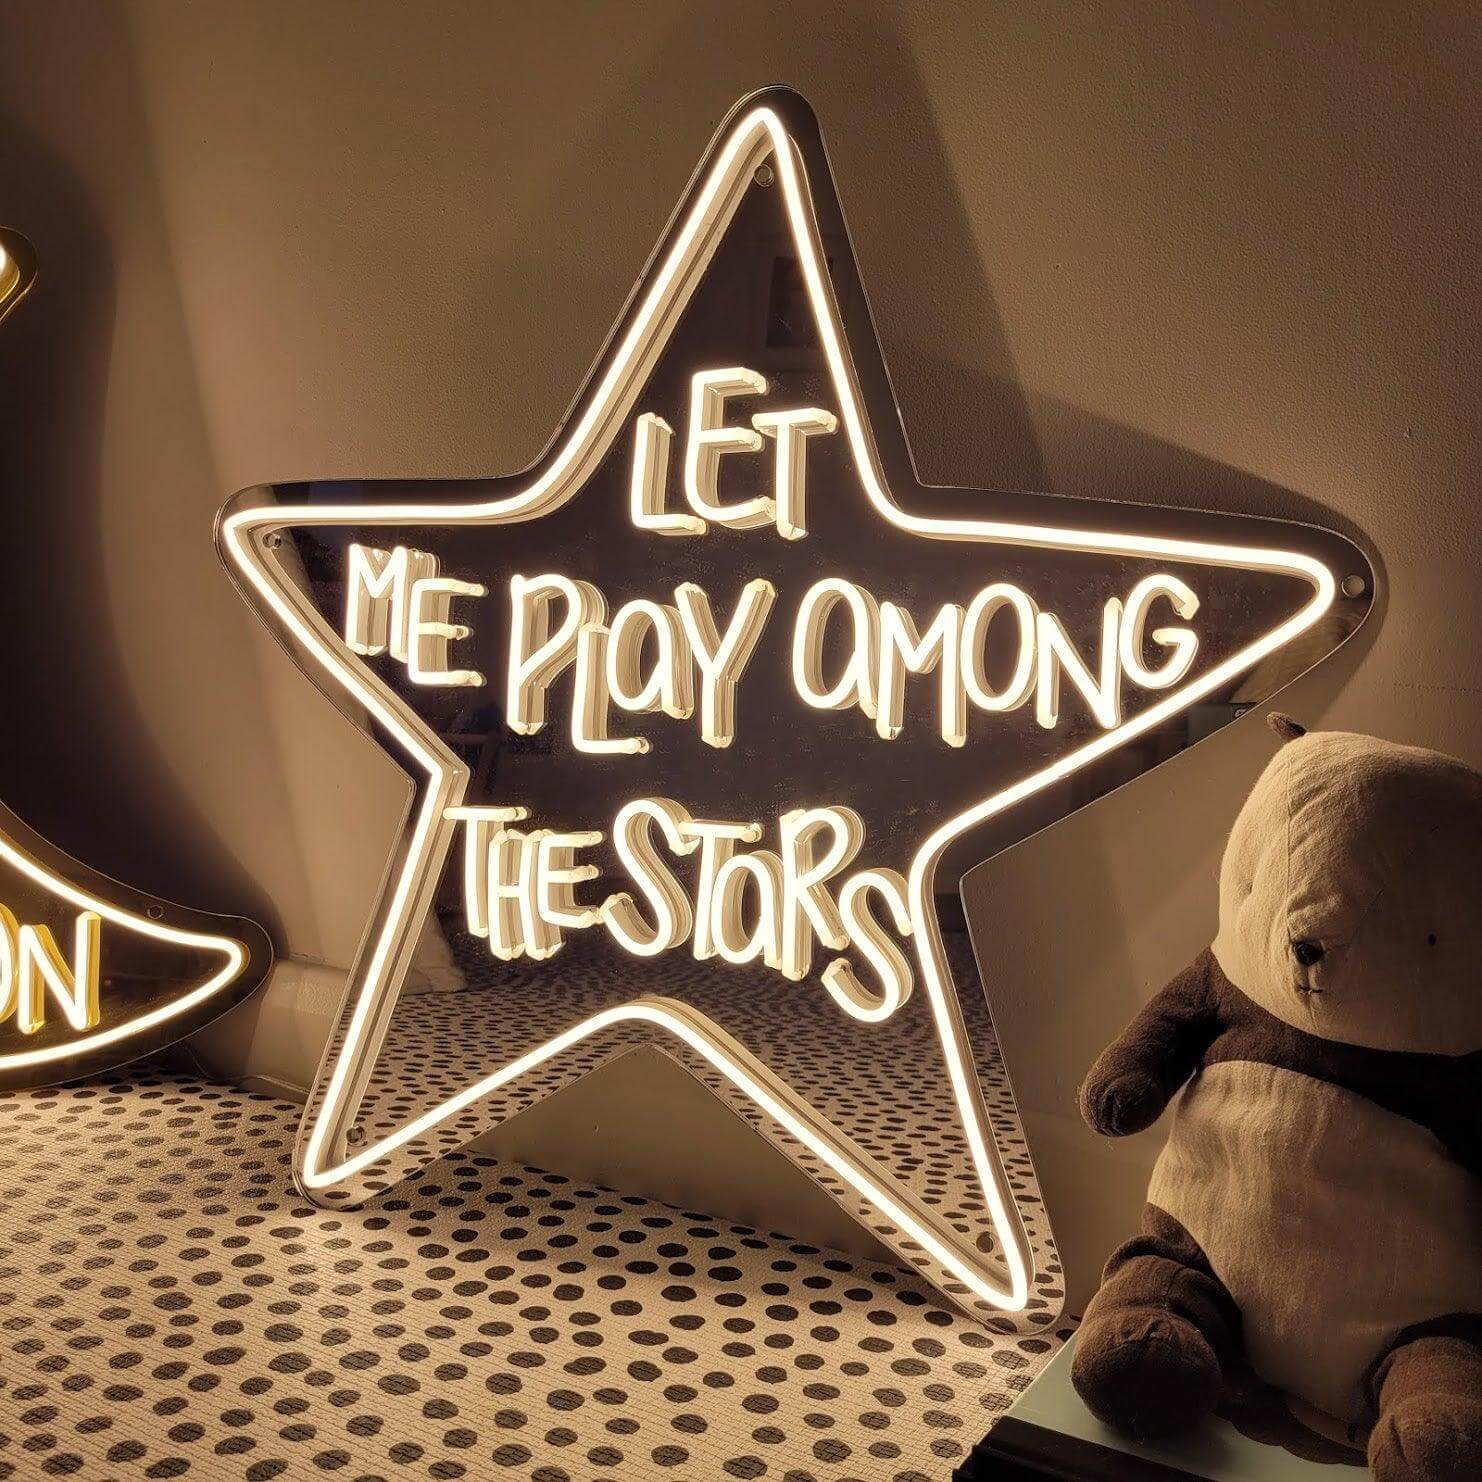 FLY ME TO THE MOON, LET ME PLAY AMONG THE STARS - Little Rae Neon Signs